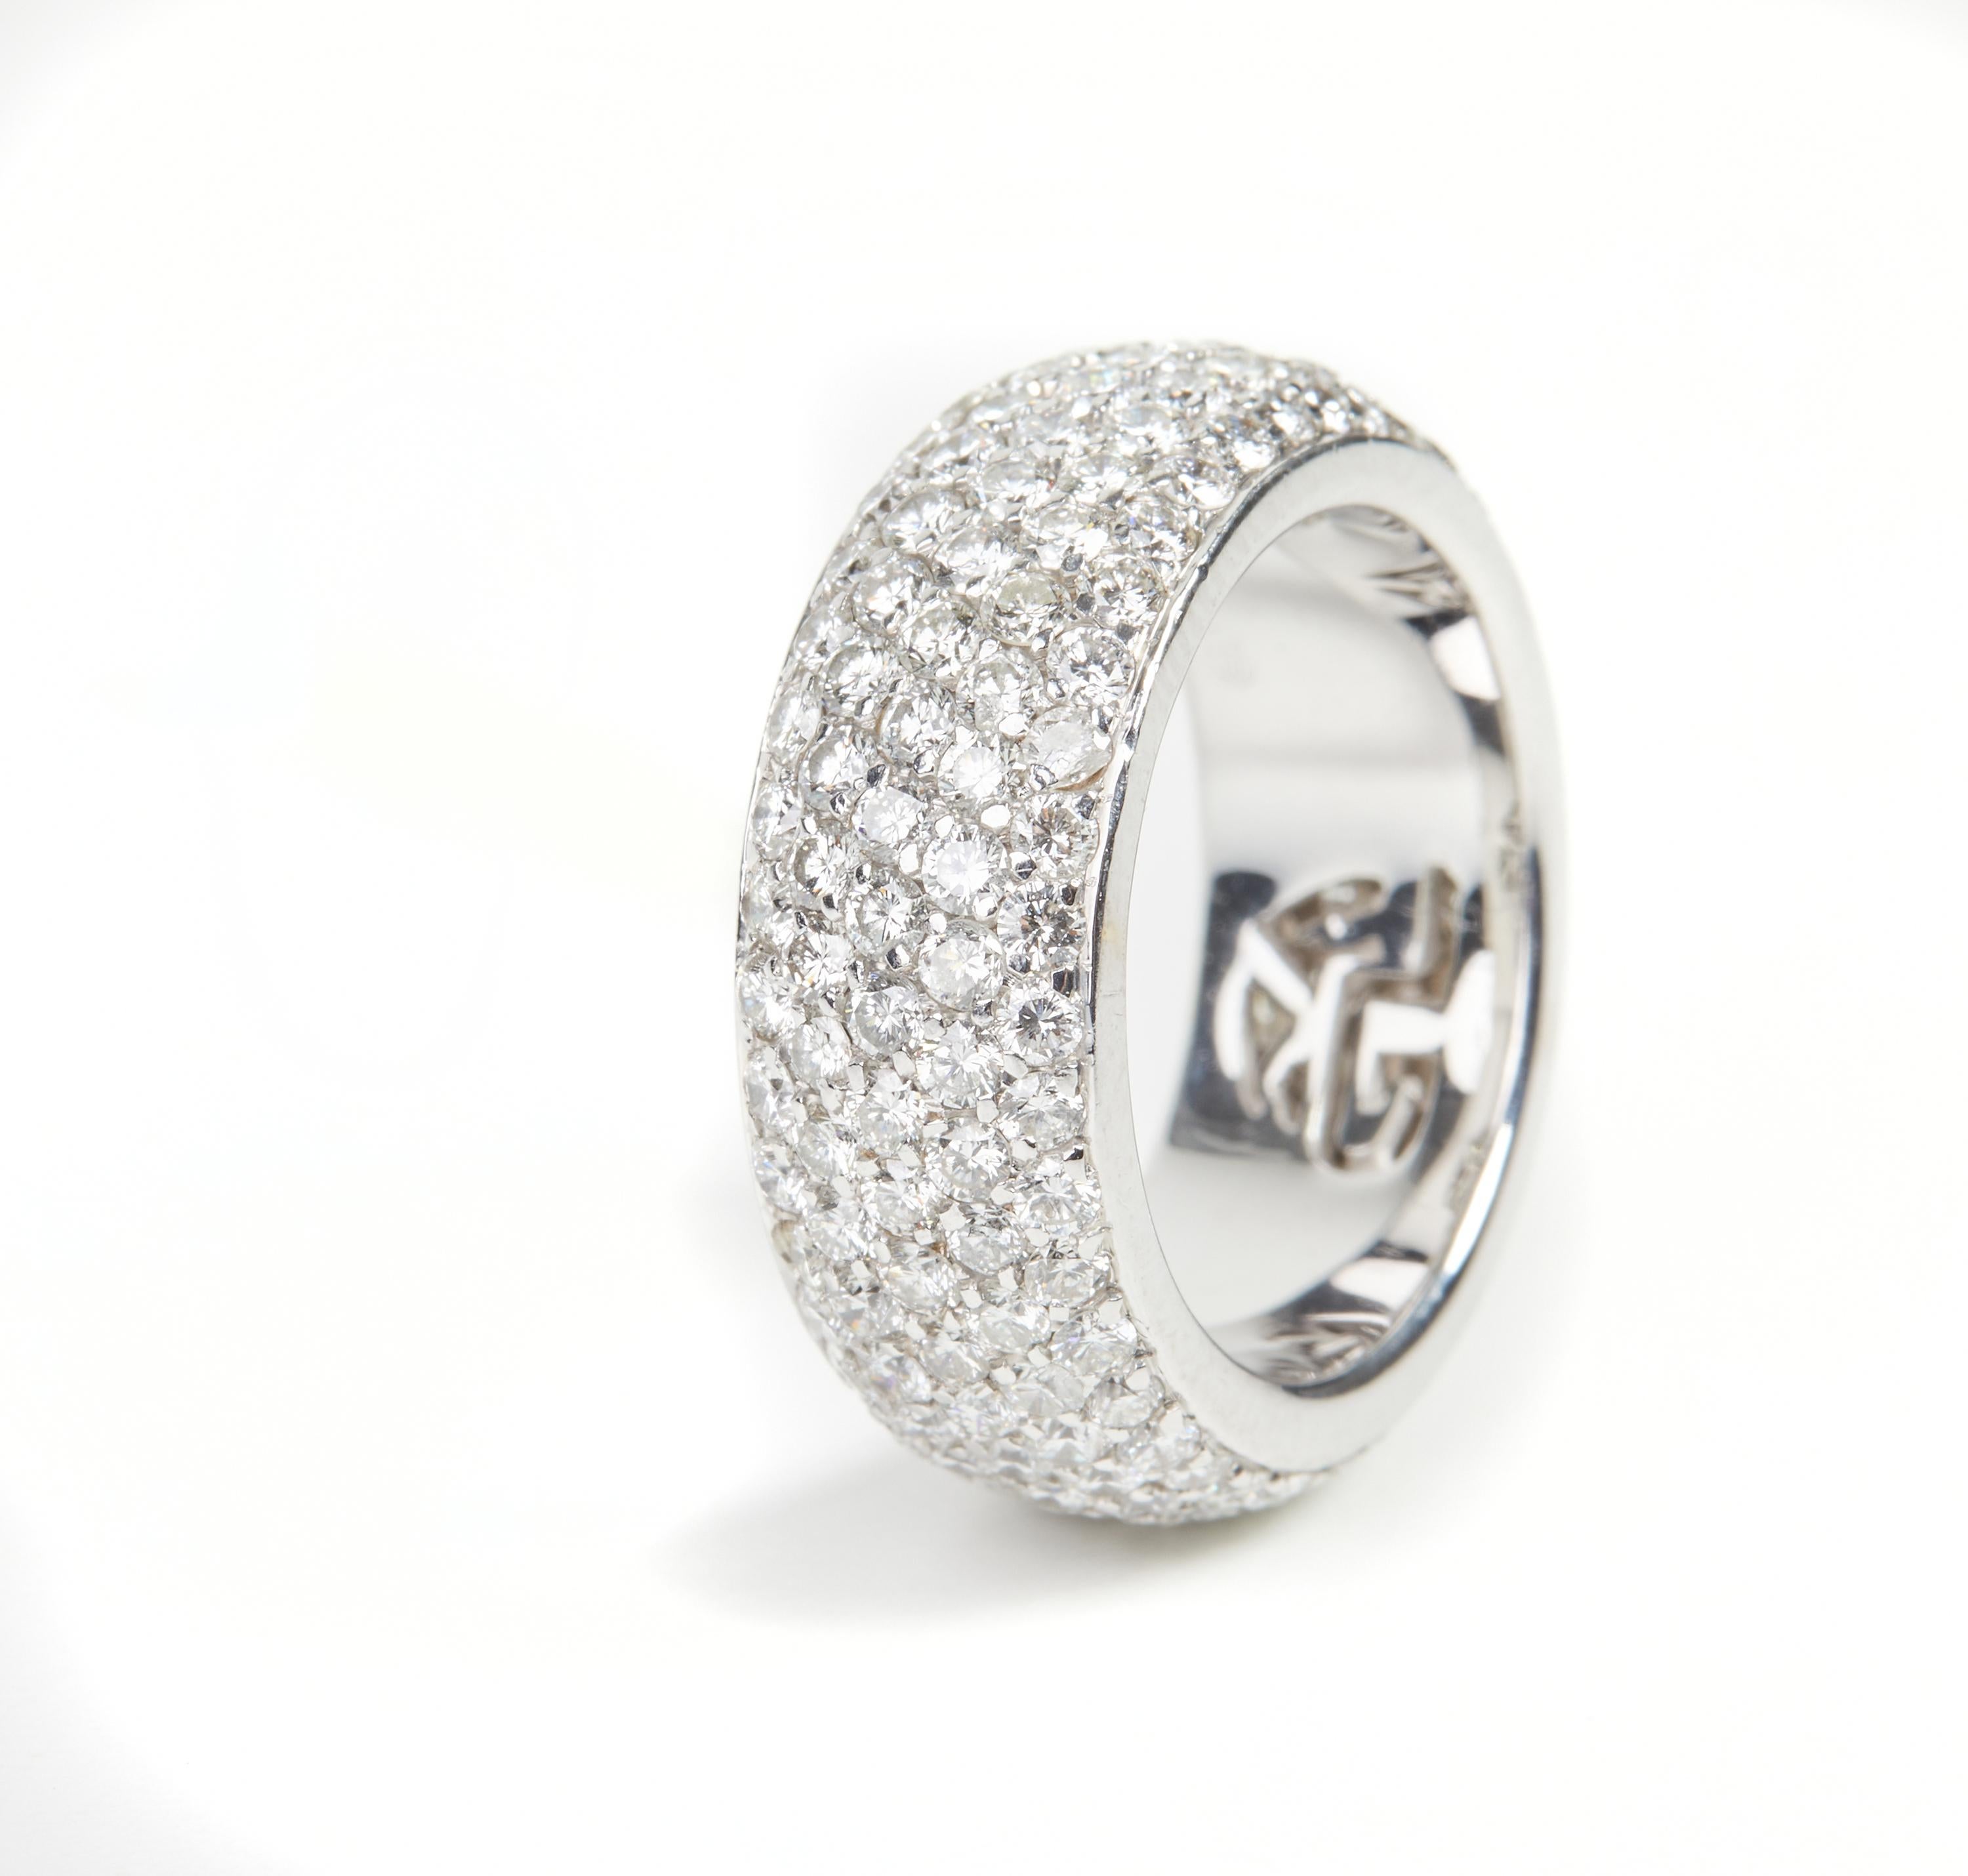 18 Karat White Gold Diamond  Ring

171 Diam. 3.22 ct



Size EU 53 


Founded in 1974, Gianni Lazzaro is a family-owned jewelery company based out of Düsseldorf, Germany.
Although rooted in Germany, Gianni Lazzaro's style and design is more